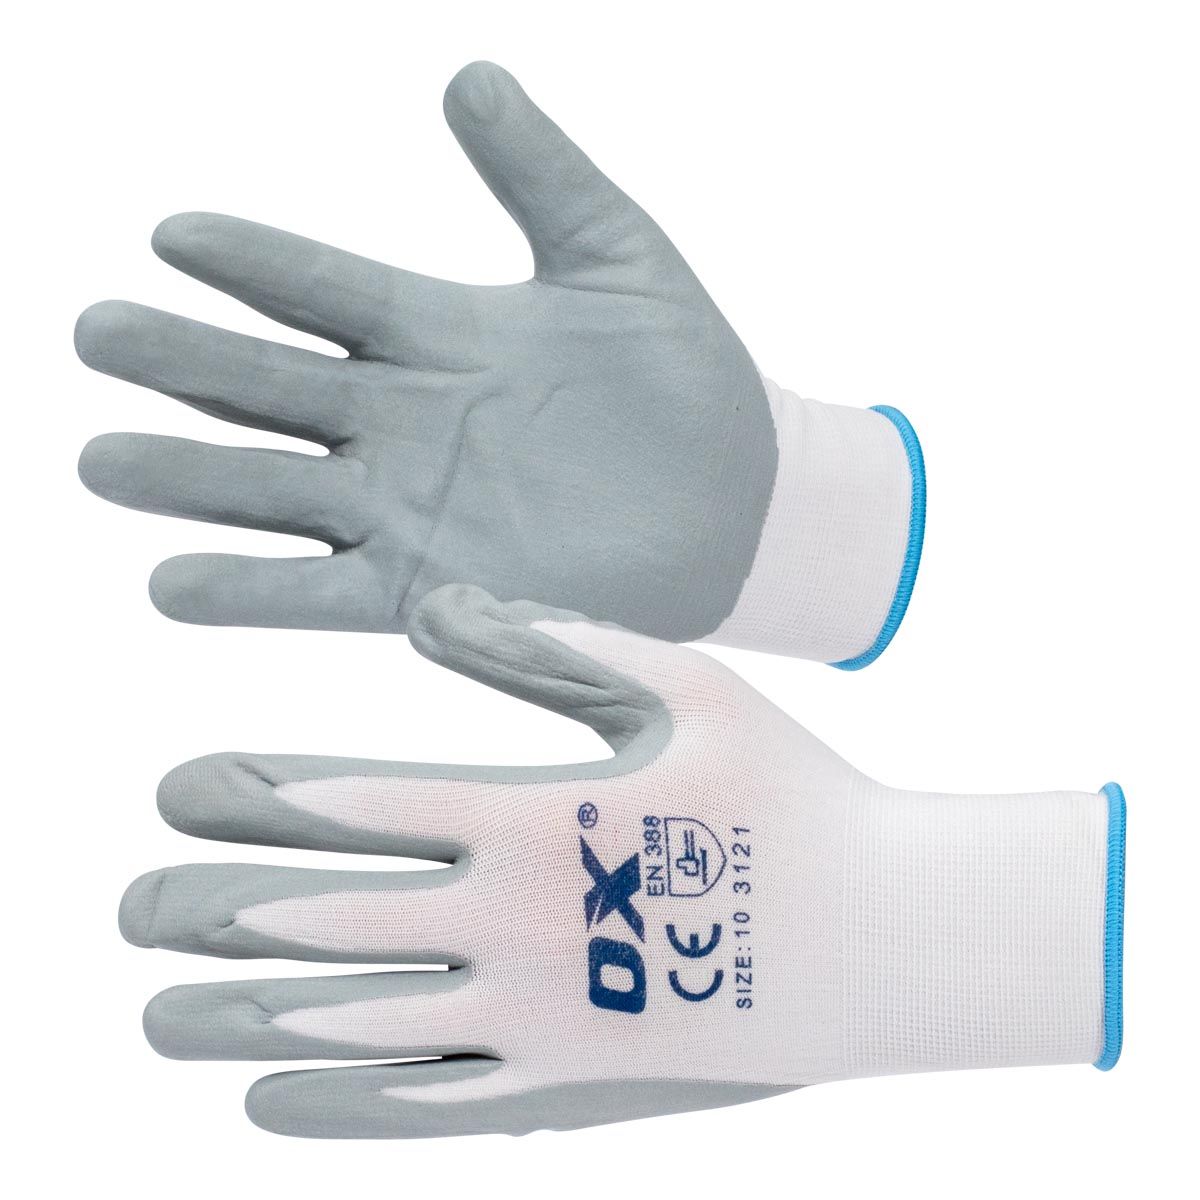 Nylon Lined Nitrile Gloves OX-S481410 by OX Tools